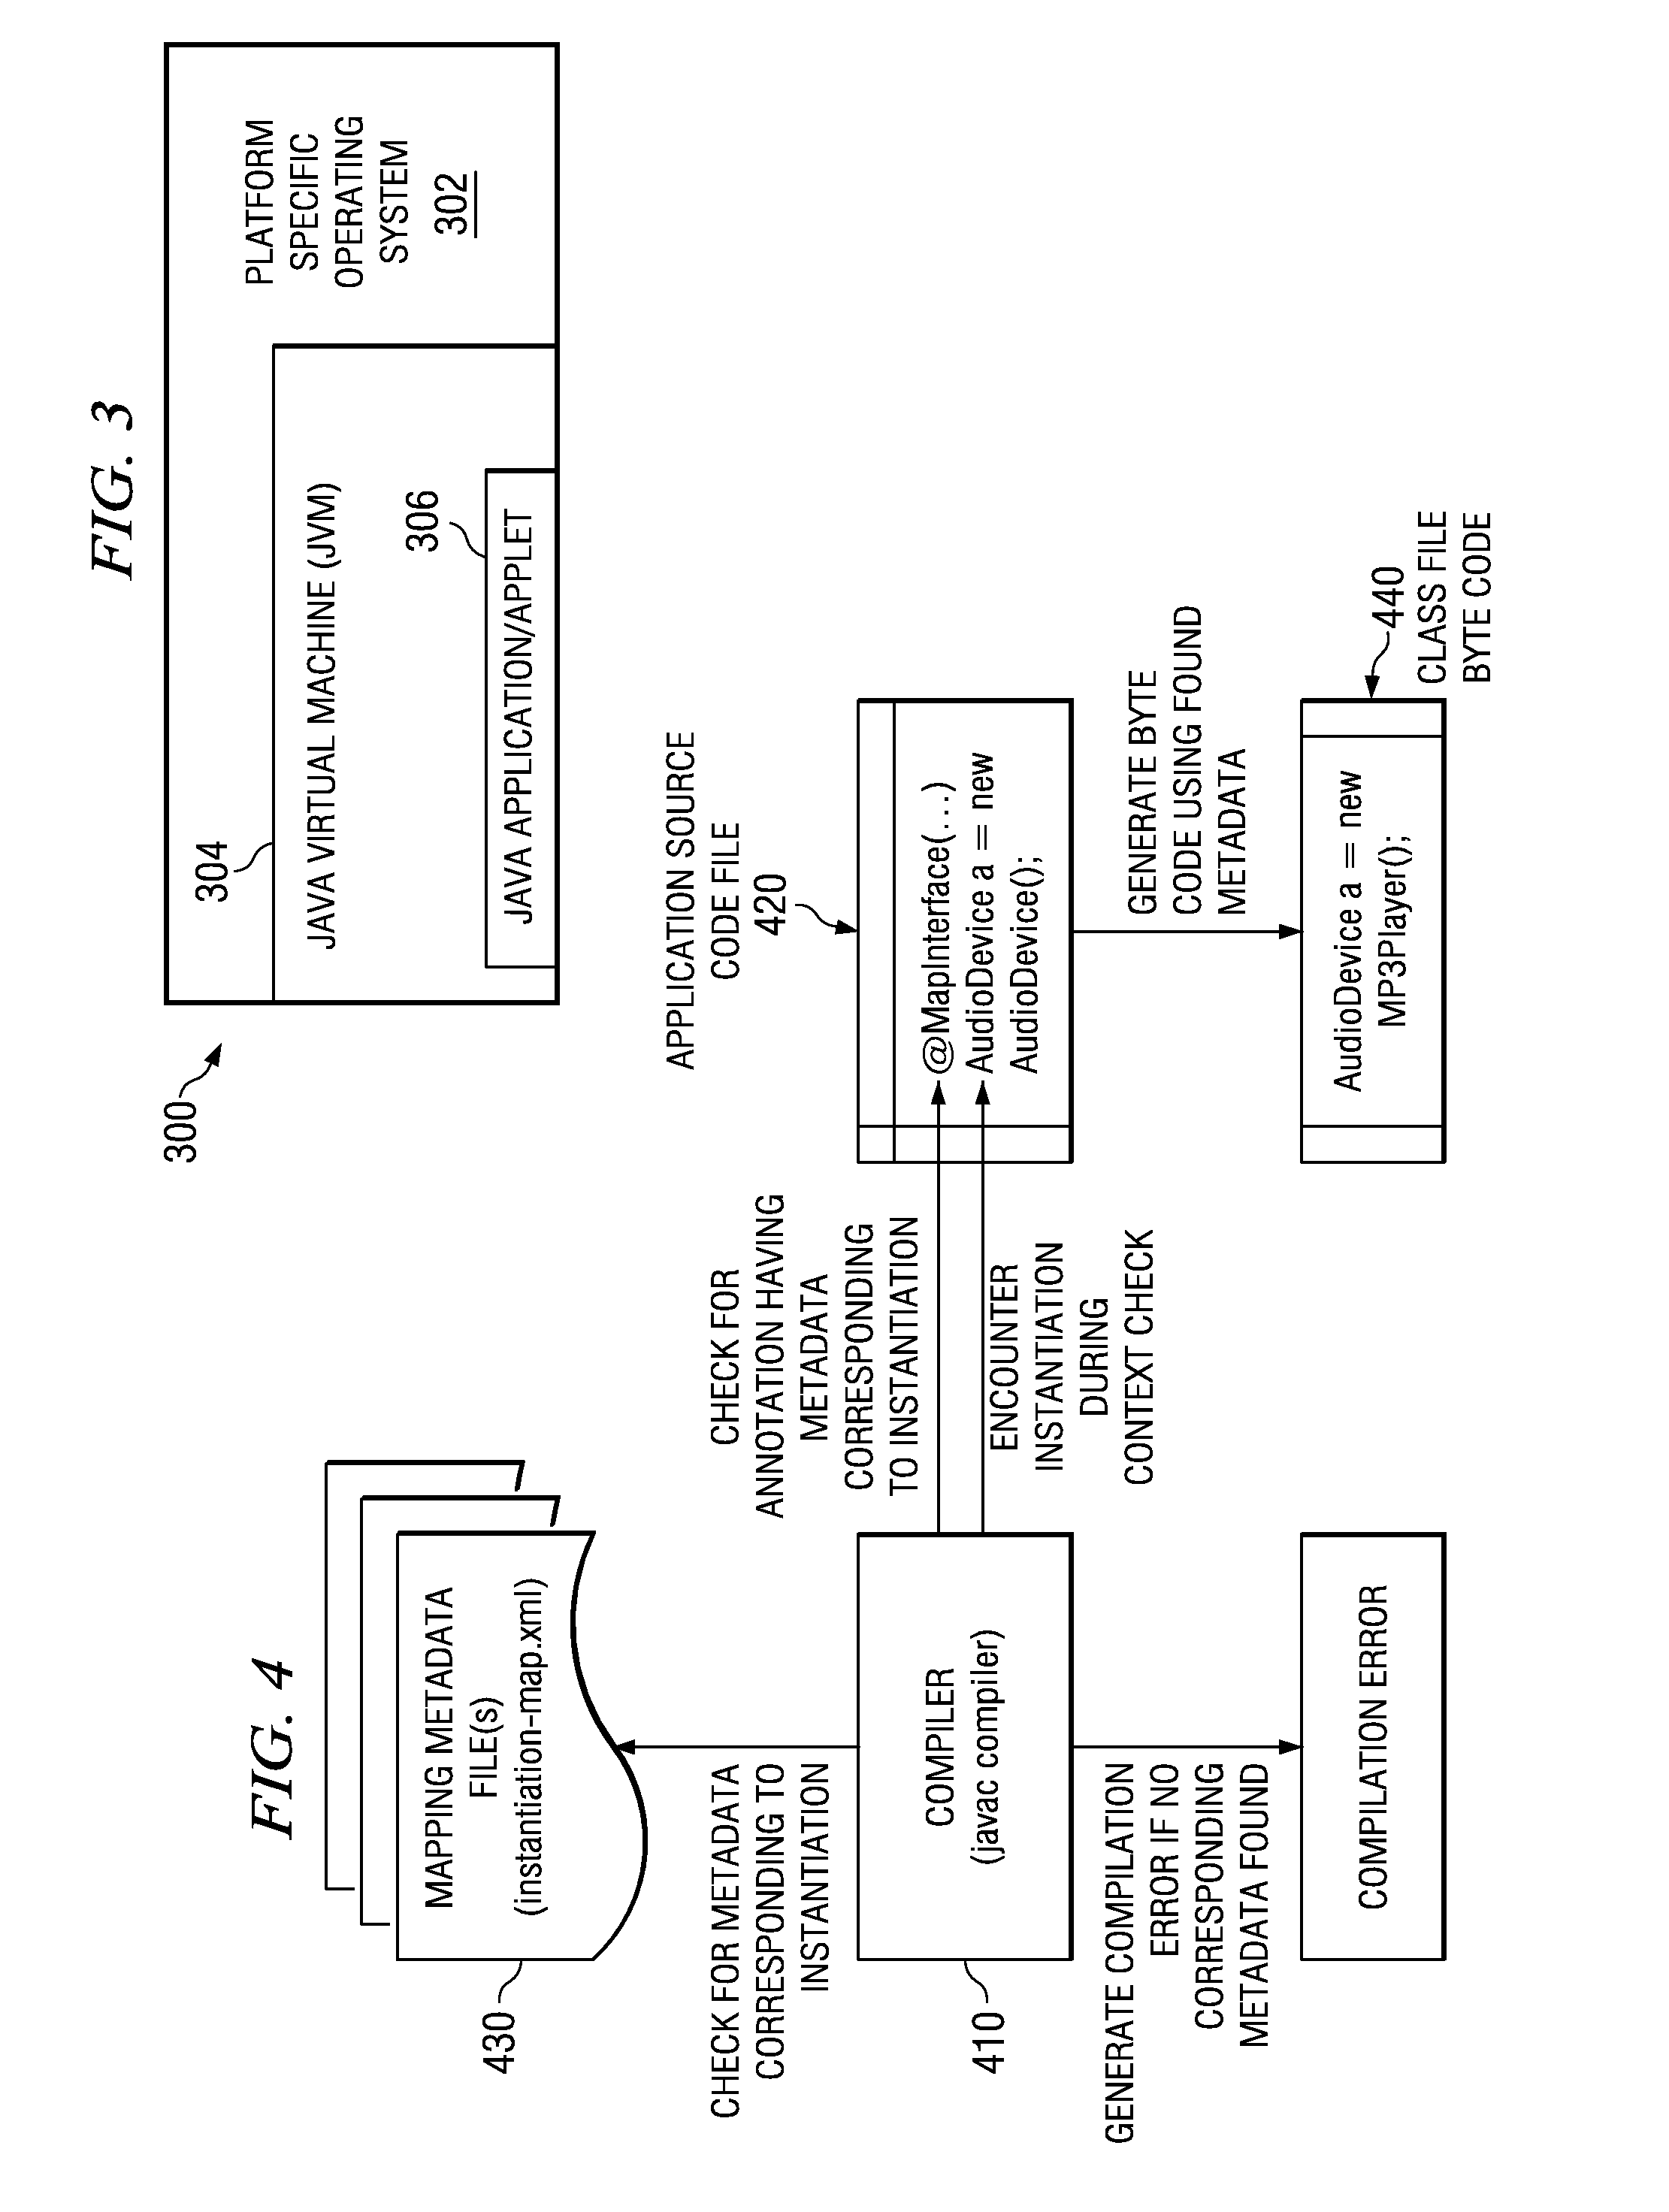 System and method for instantiating an interface or abstract class in application code